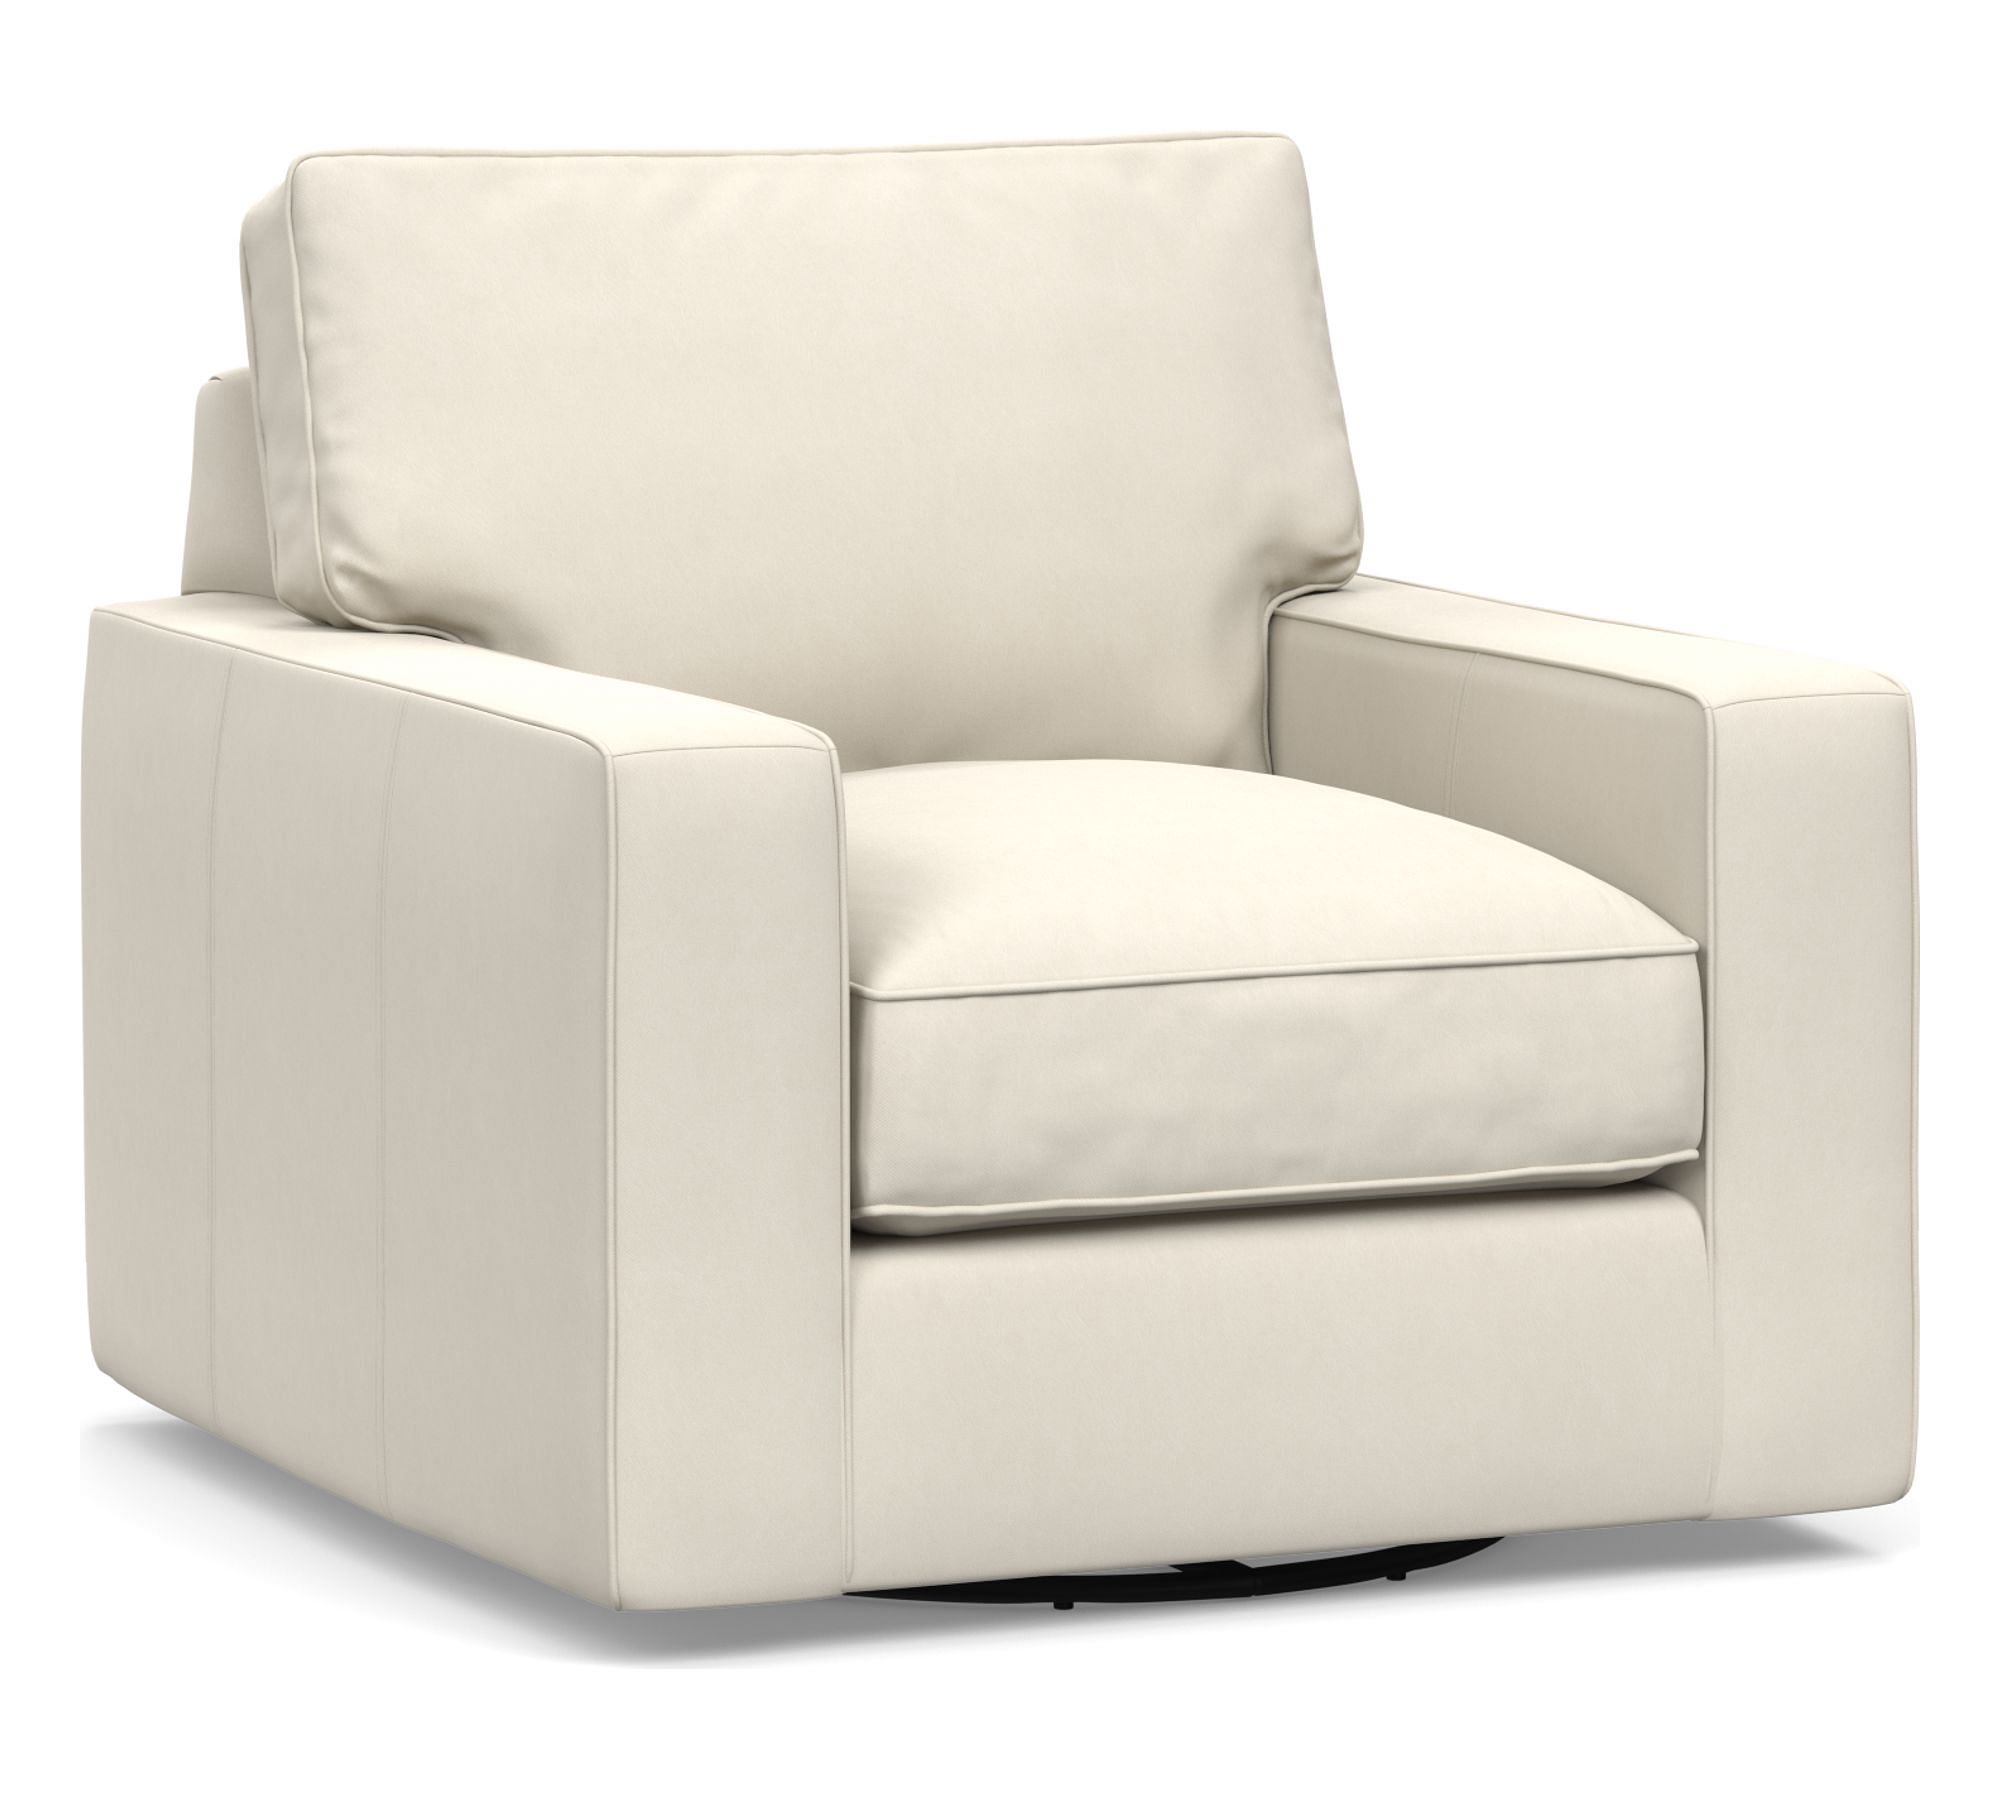 PB Comfort Square Arm Leather Swivel Chair